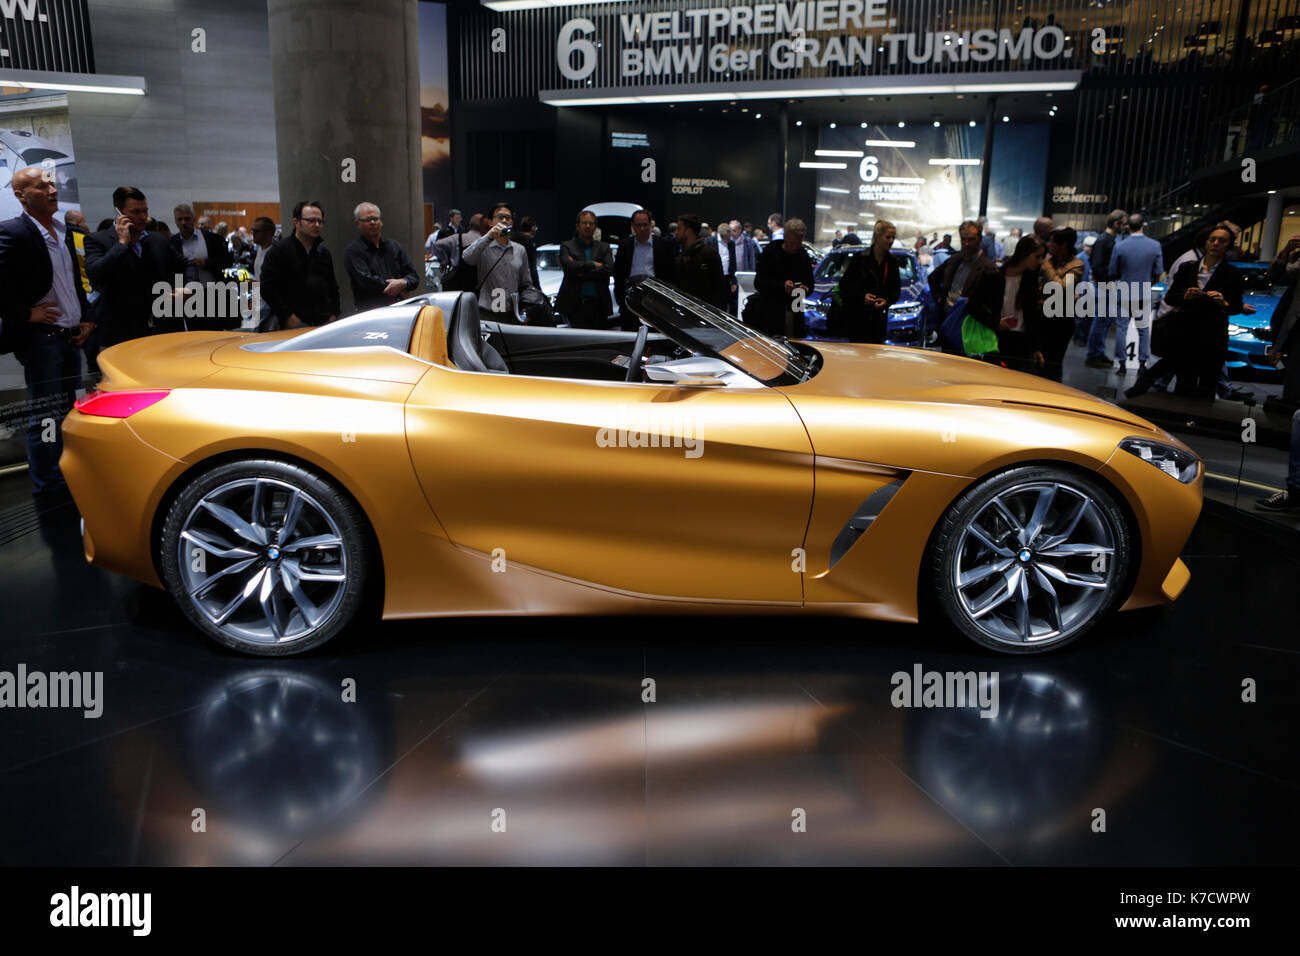 The German car manufacturer BMW presented the BMW Concept Z4 at the